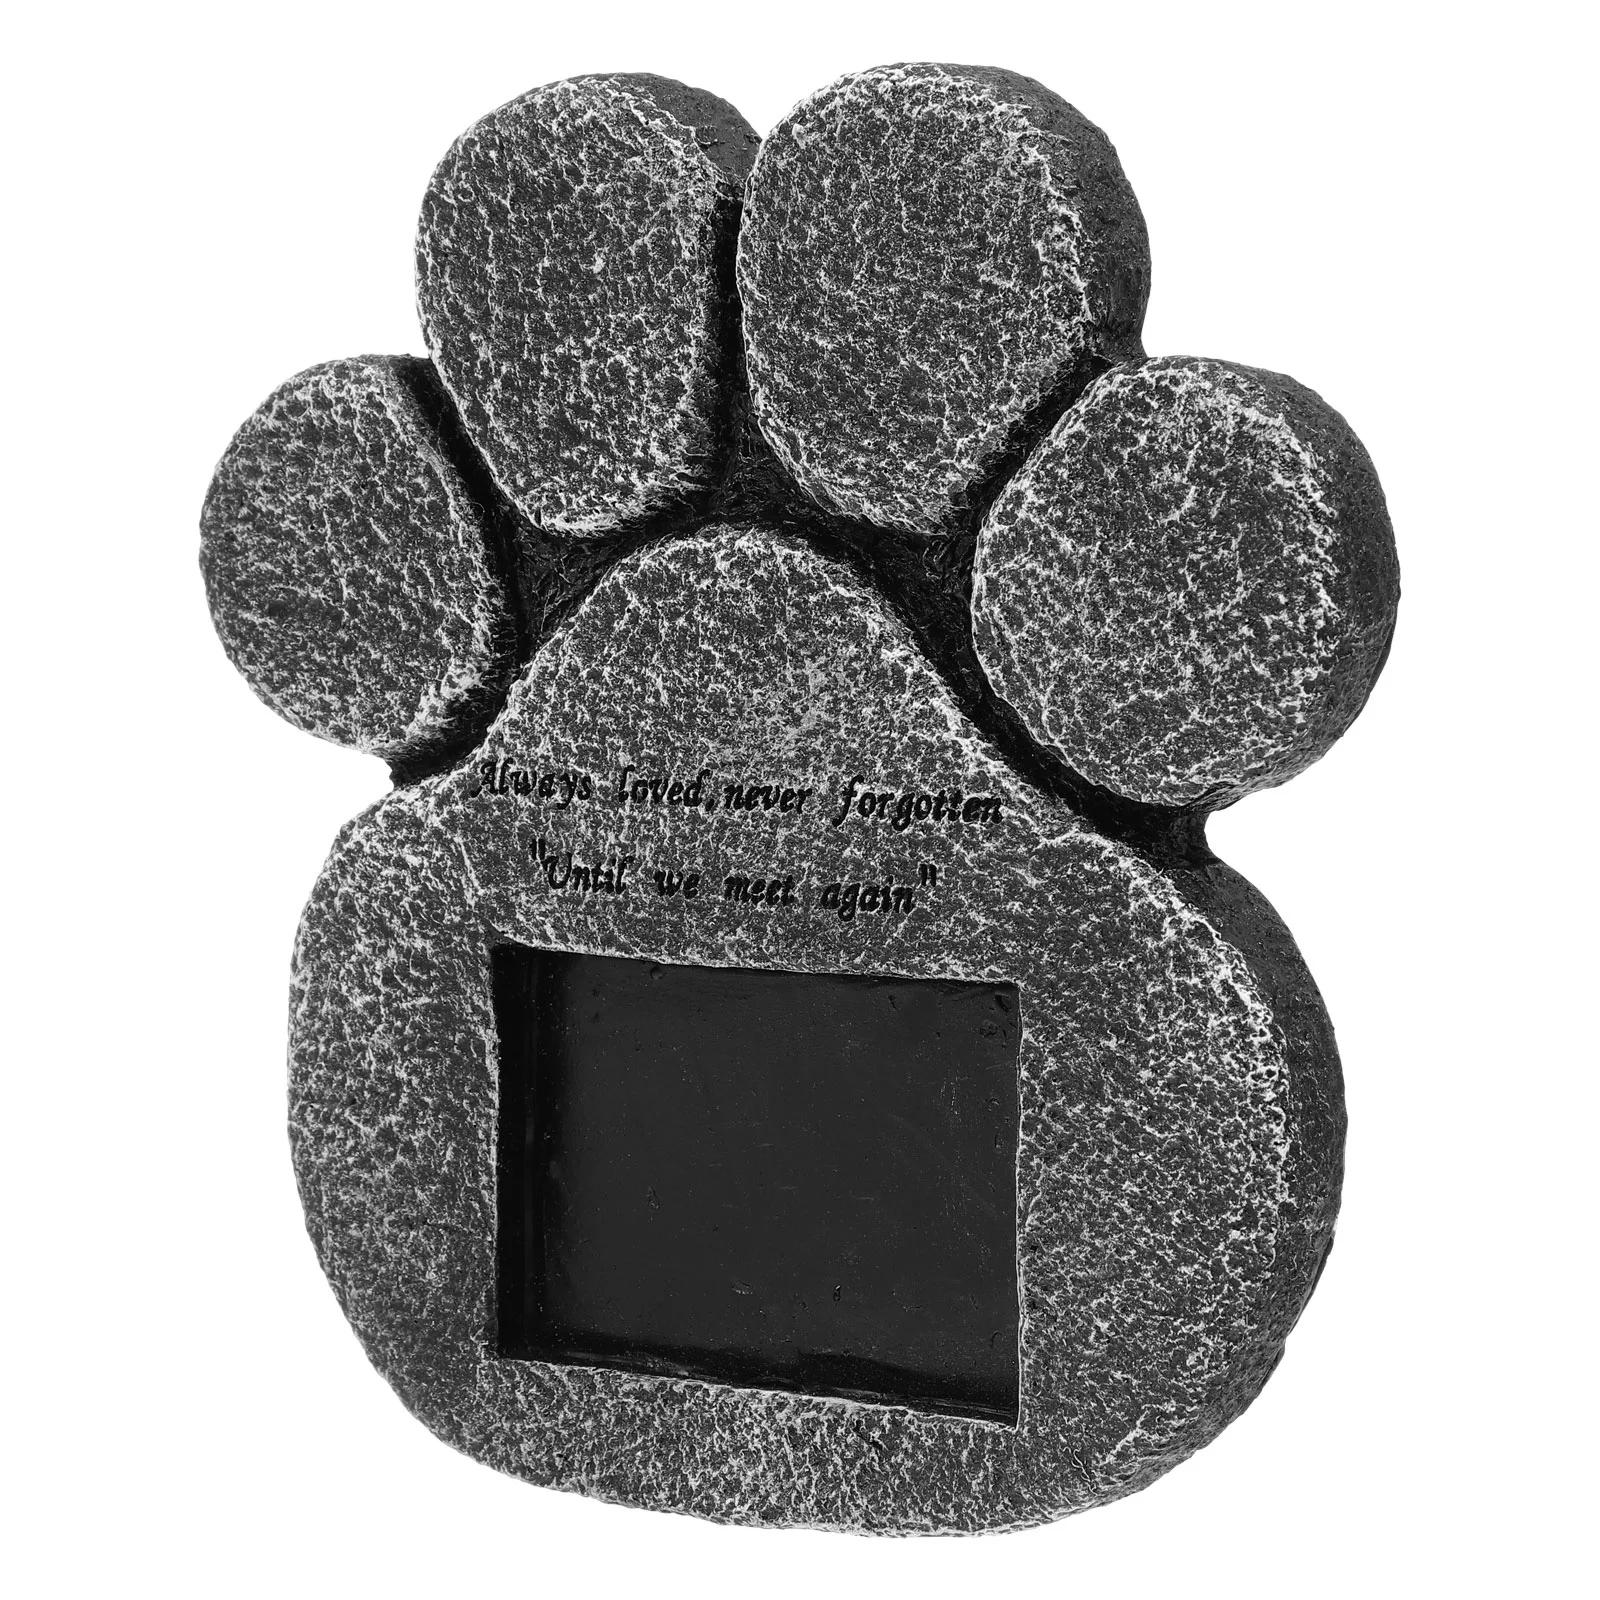 

Pet Memorial Dog Grave Tombstone Stone Cat Marker Cemetery Markers Garden For Decorations Puppy Stones Paw Courtyard Statue